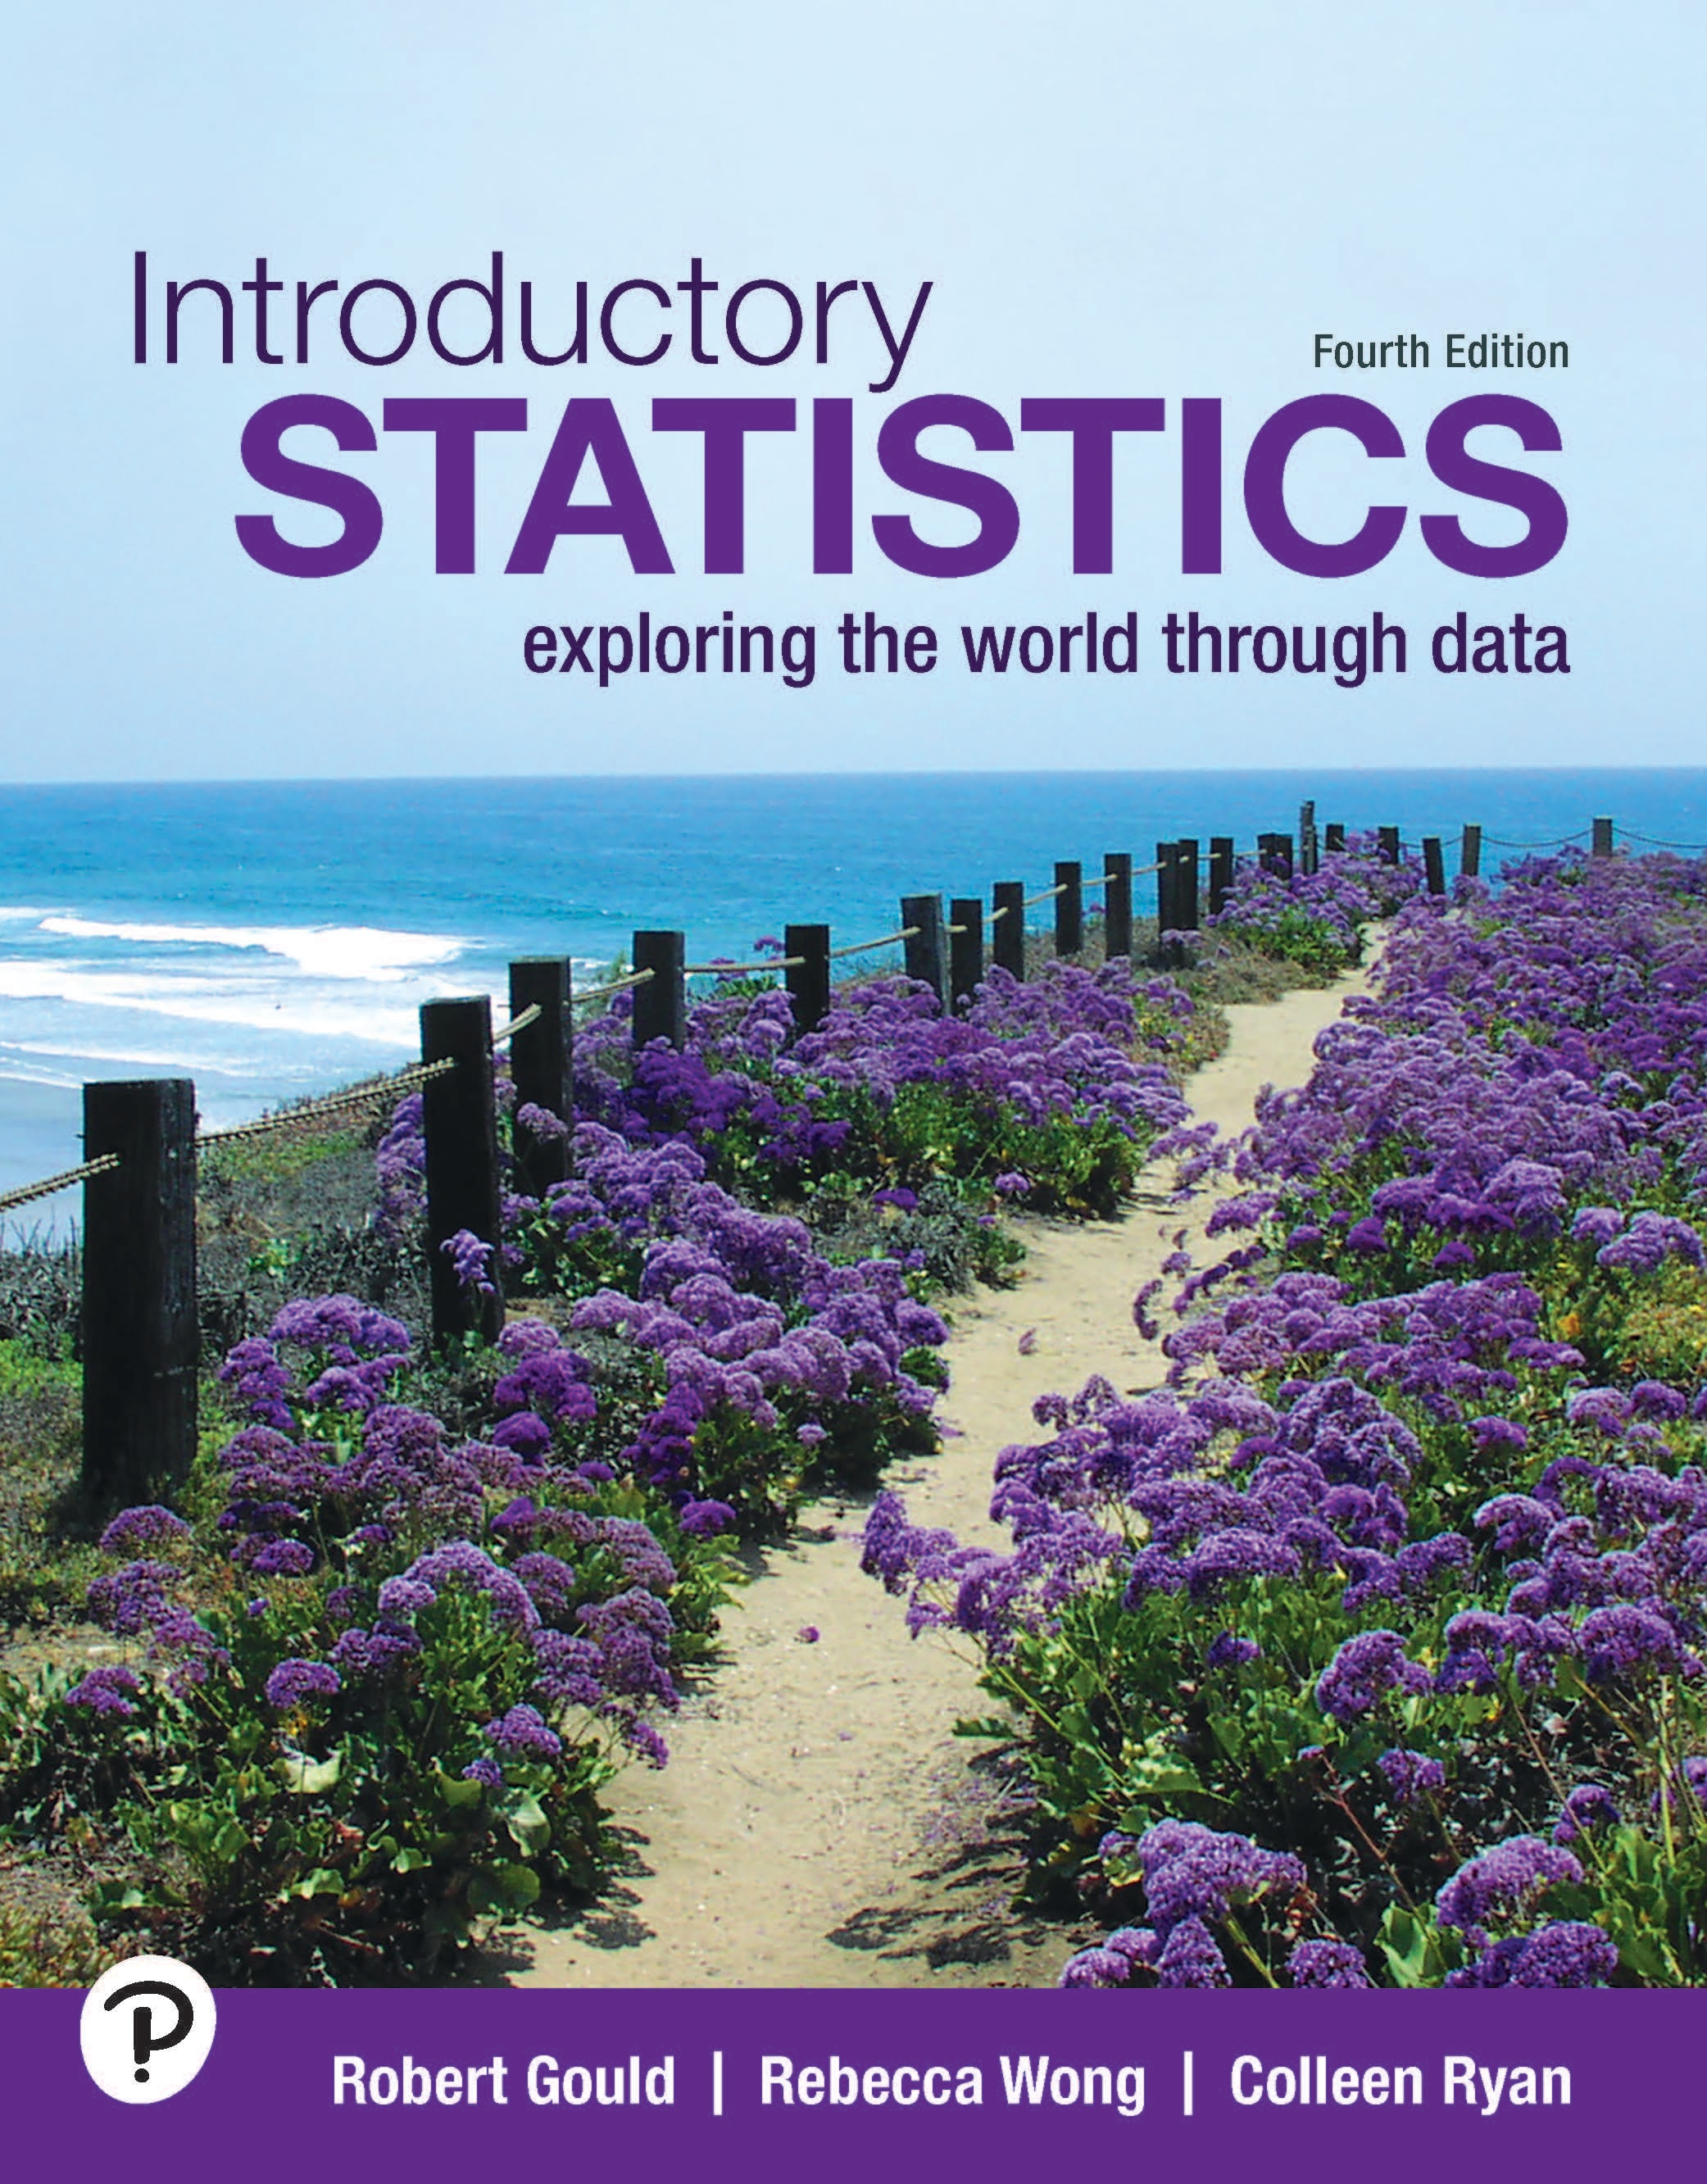 Cover design for the 3rd edition of Introductory Statistics featuring a scenic landscape revealing a straight dirt path through a field of vibrant yellow flowers under a blue sky with scattered clouds. 